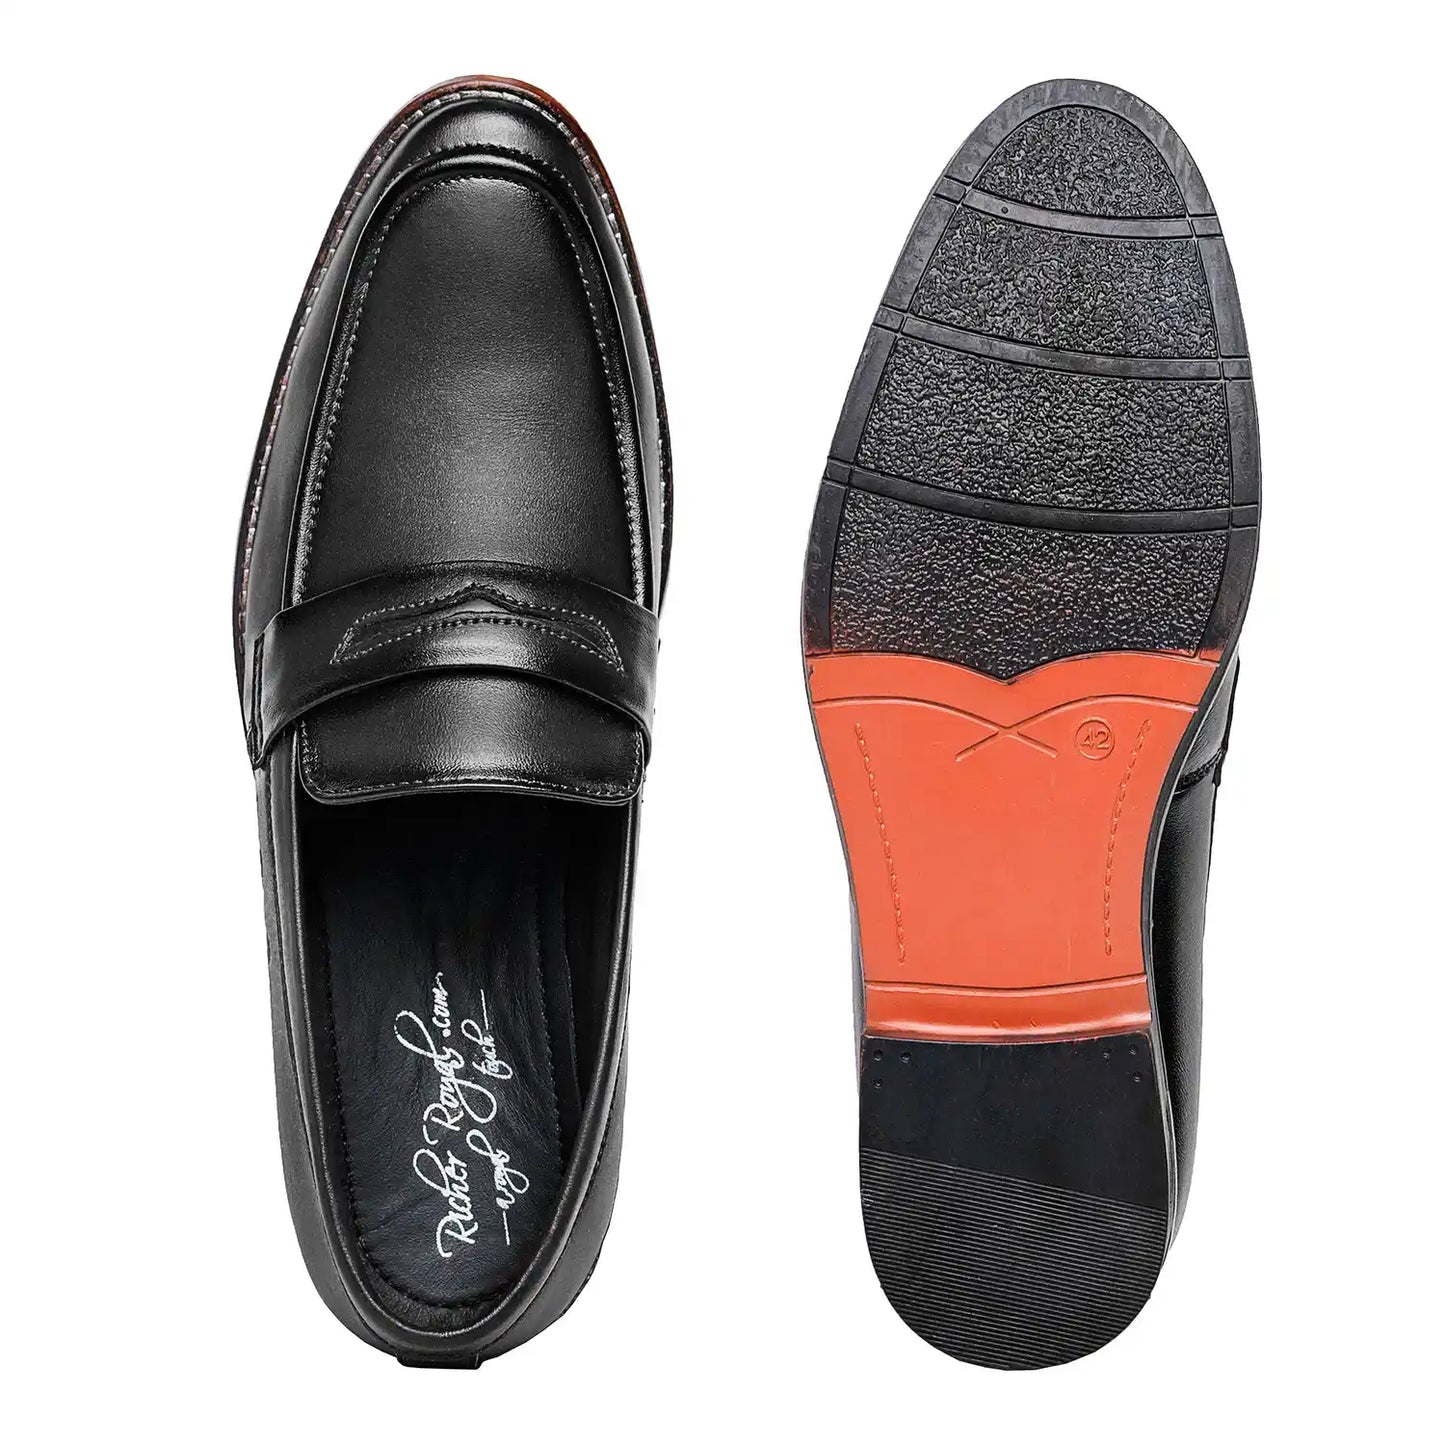 Penny Loafers Pure Leather Slip On for Men